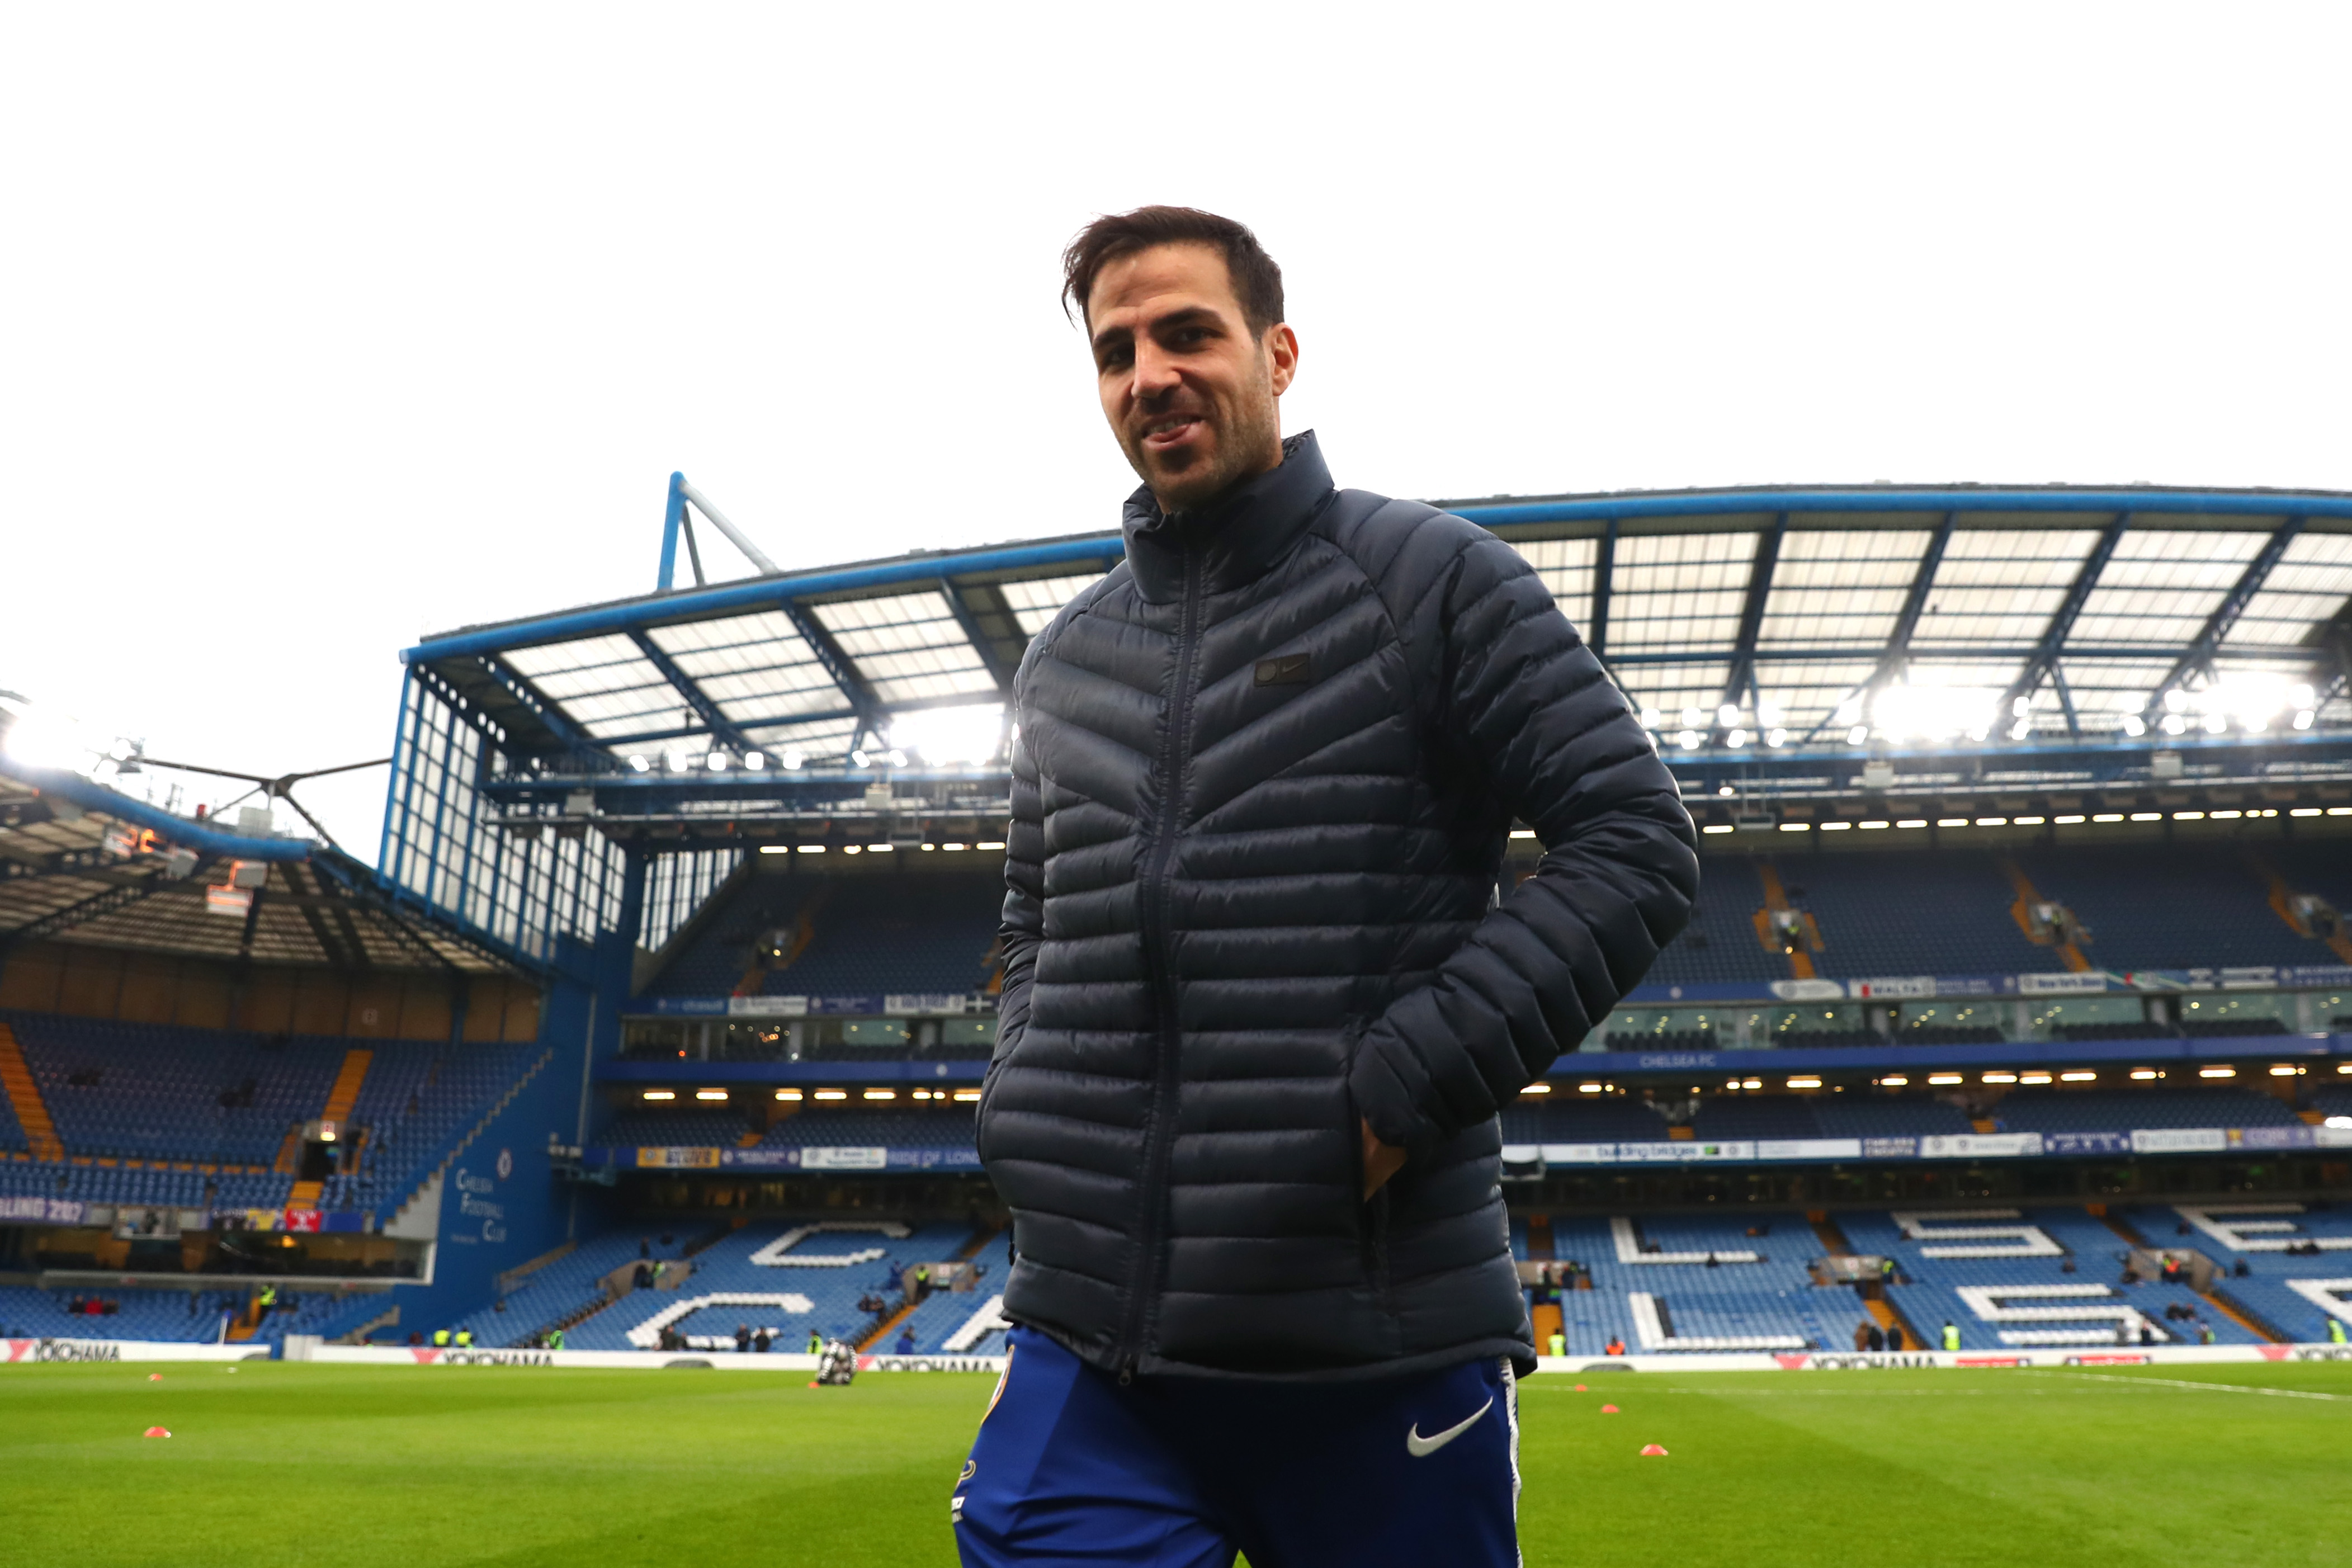 LONDON, ENGLAND - JANUARY 05: Cesc Fabregas of Chelsea walks off after taking a look around the pitch prior to the FA Cup Third Round match between Chelsea and Nottingham Forest at Stamford Bridge on January 5, 2019 in London, United Kingdom.  (Photo by Clive Rose/Getty Images)